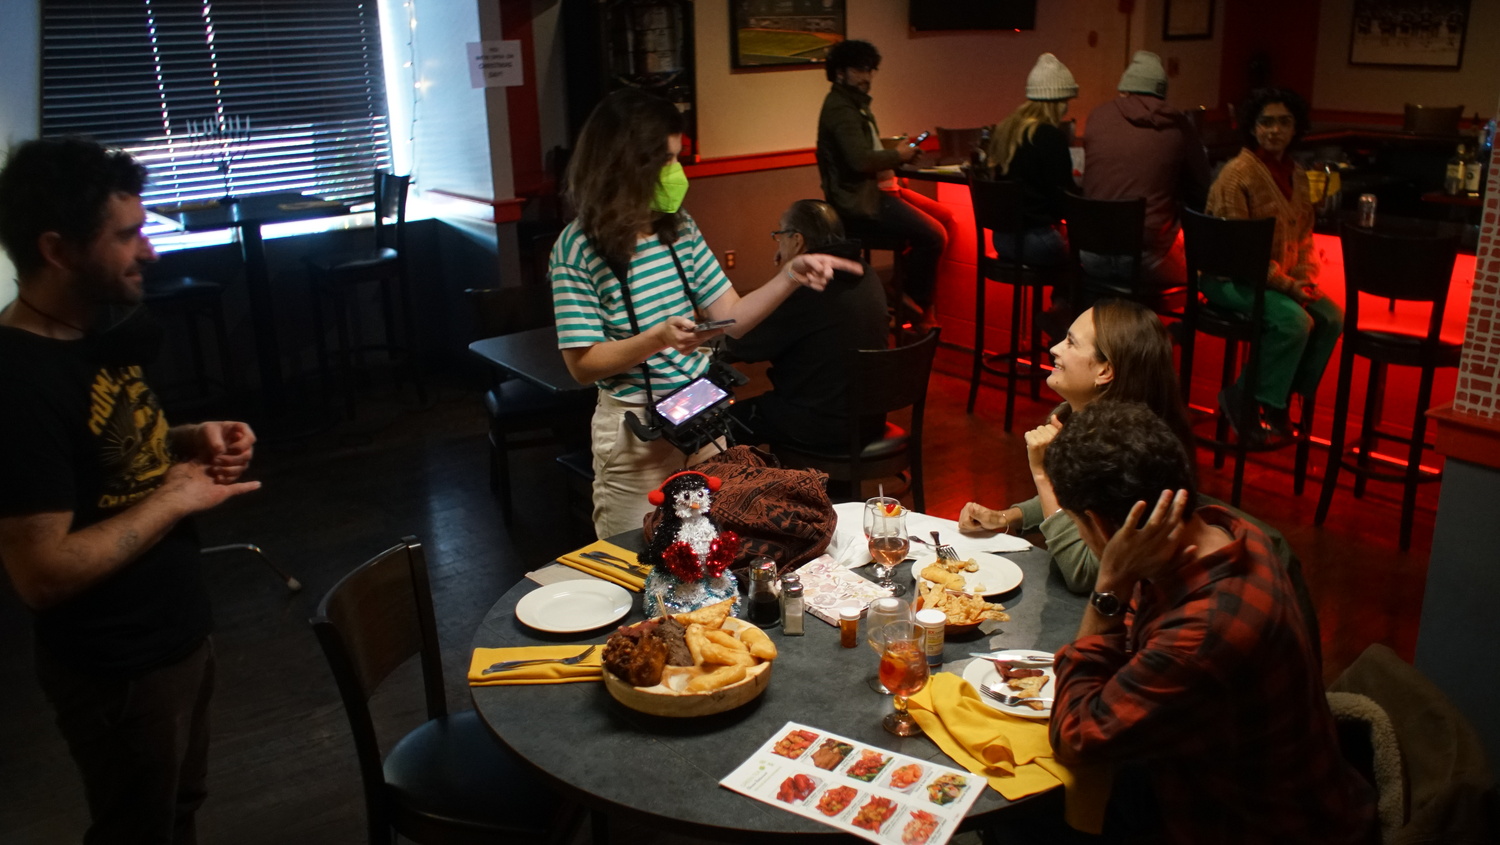 Directors Dan Kennedy and Caroline Keene work with Sawyer Spielberg and Raye Levine in a Chinese restaurant scene in the film 